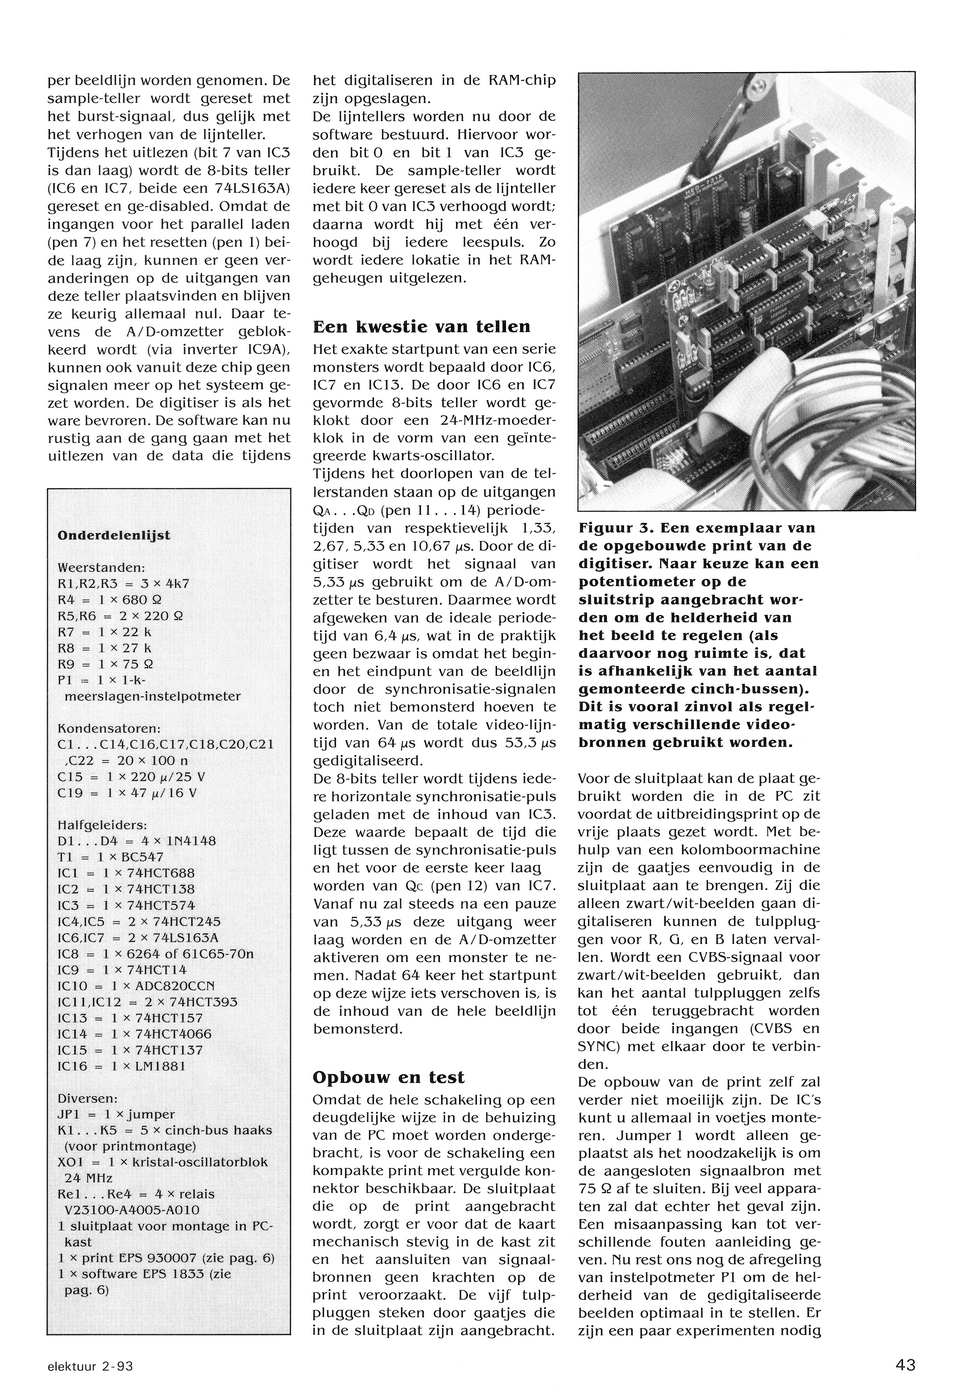 Article page 5/6 (click for article page 6/6)